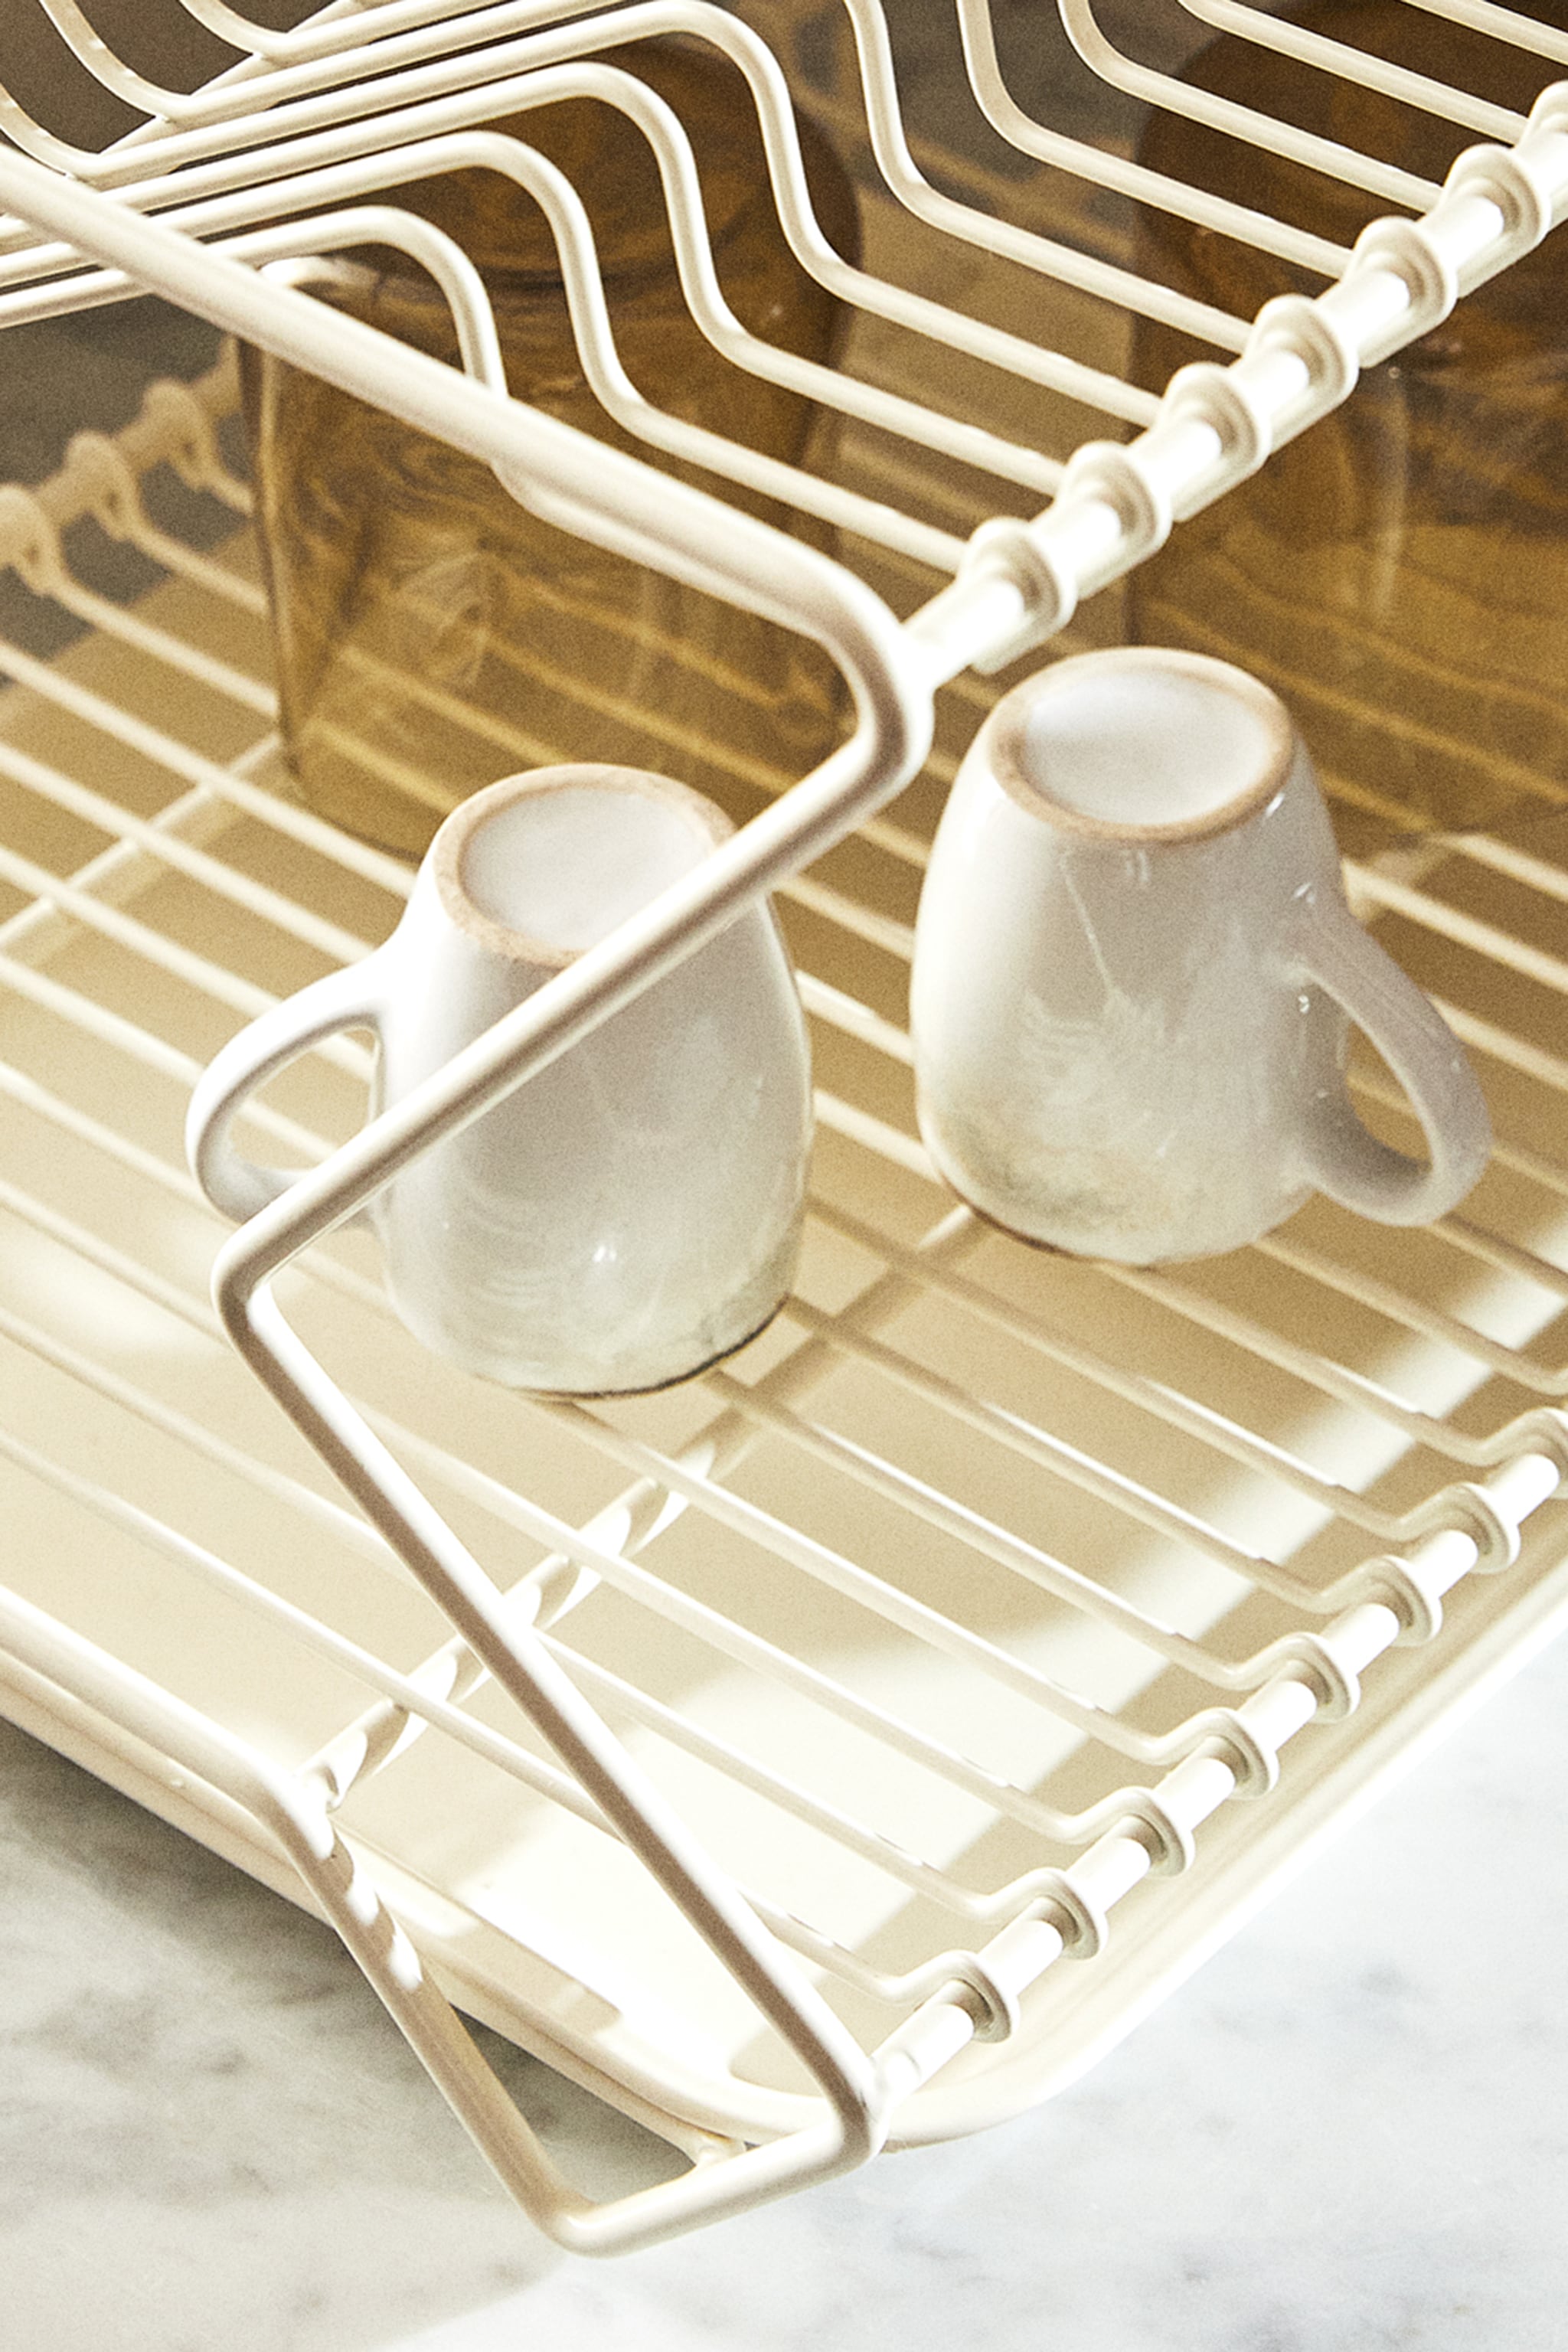 METAL DISH RACK WITH TRAY